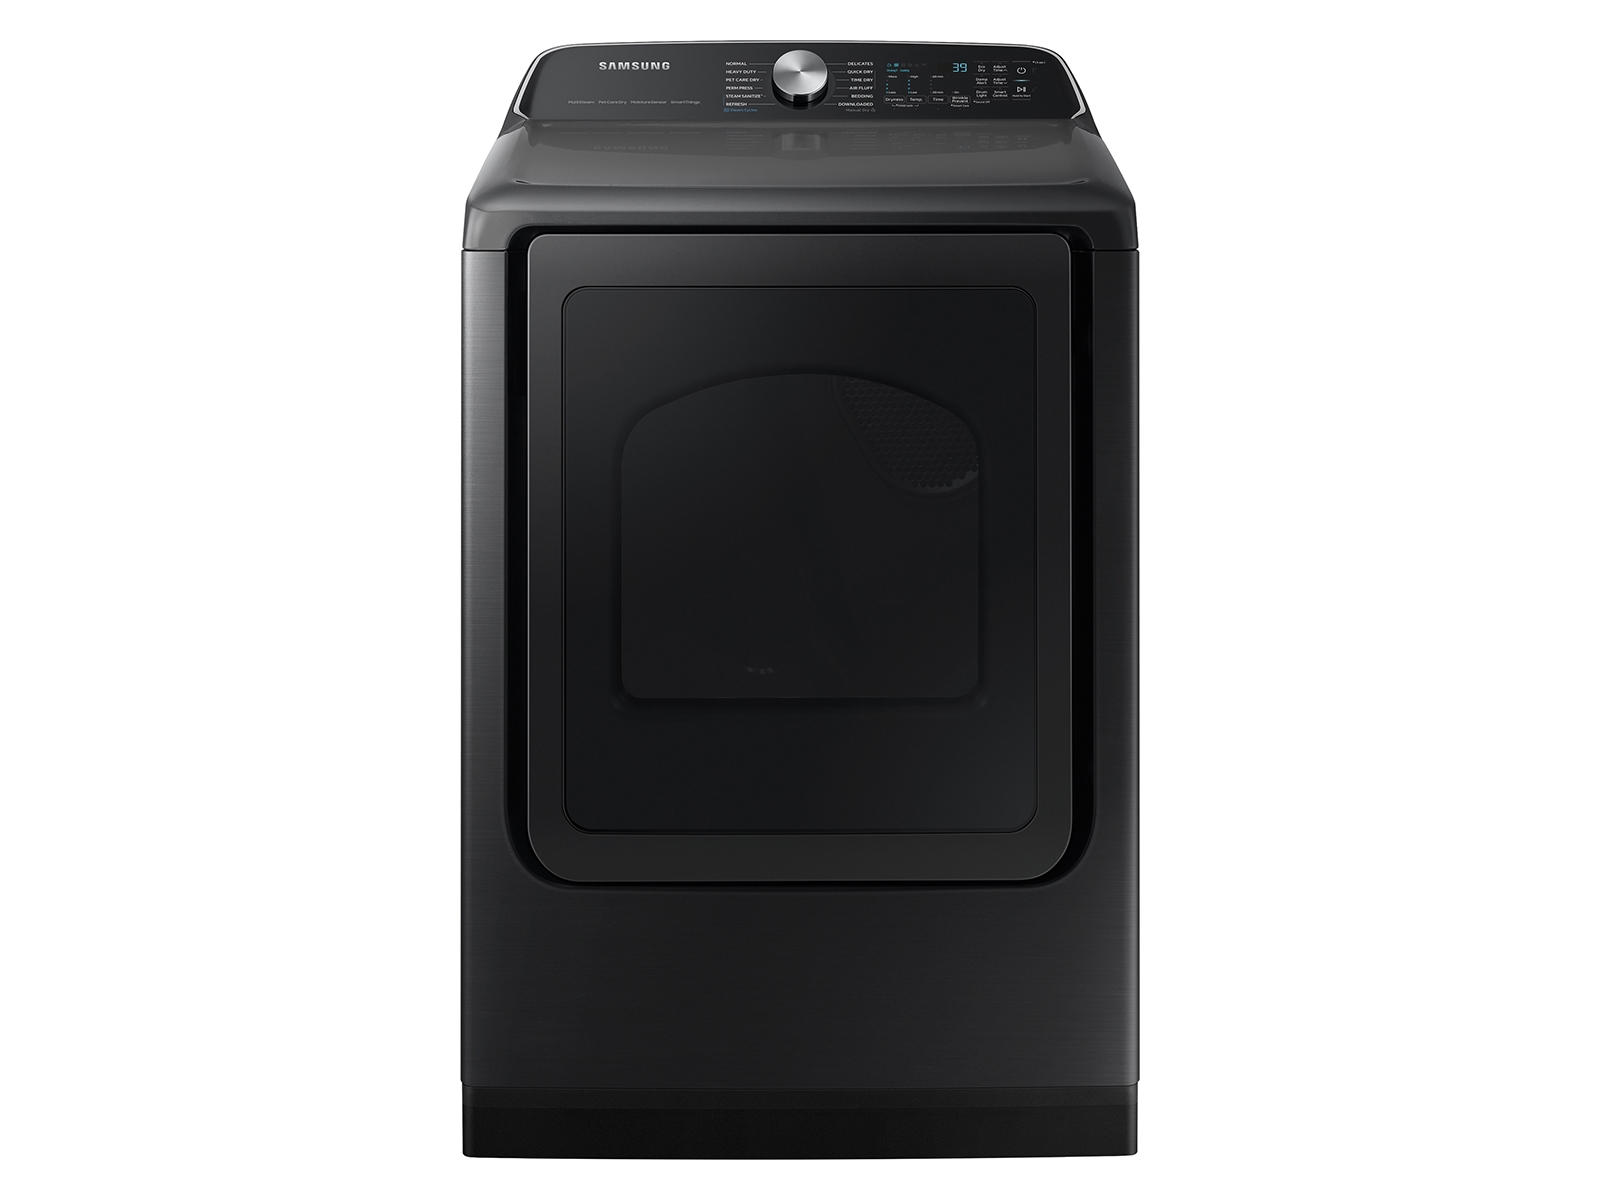 Photos - Tumble Dryer Samsung 7.4 cu. ft. Smart Gas Dryer with Steam Sanitize+ in Brushed Black( 